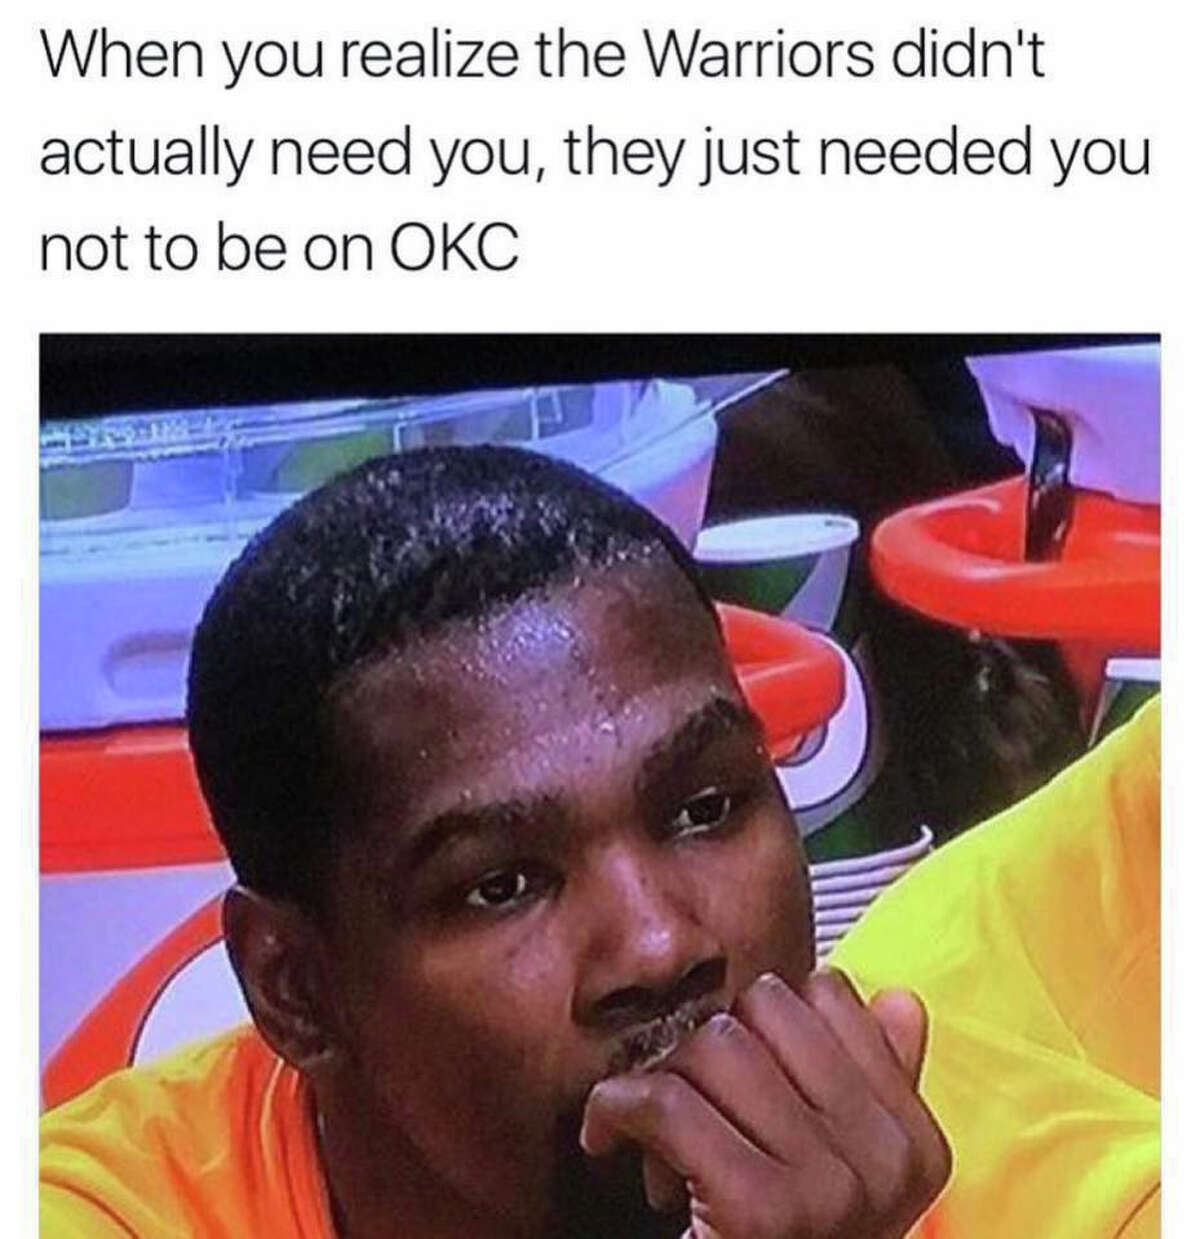 PHOTOS: Memes about other teams in this year's NBA playoffs Source: Twitter